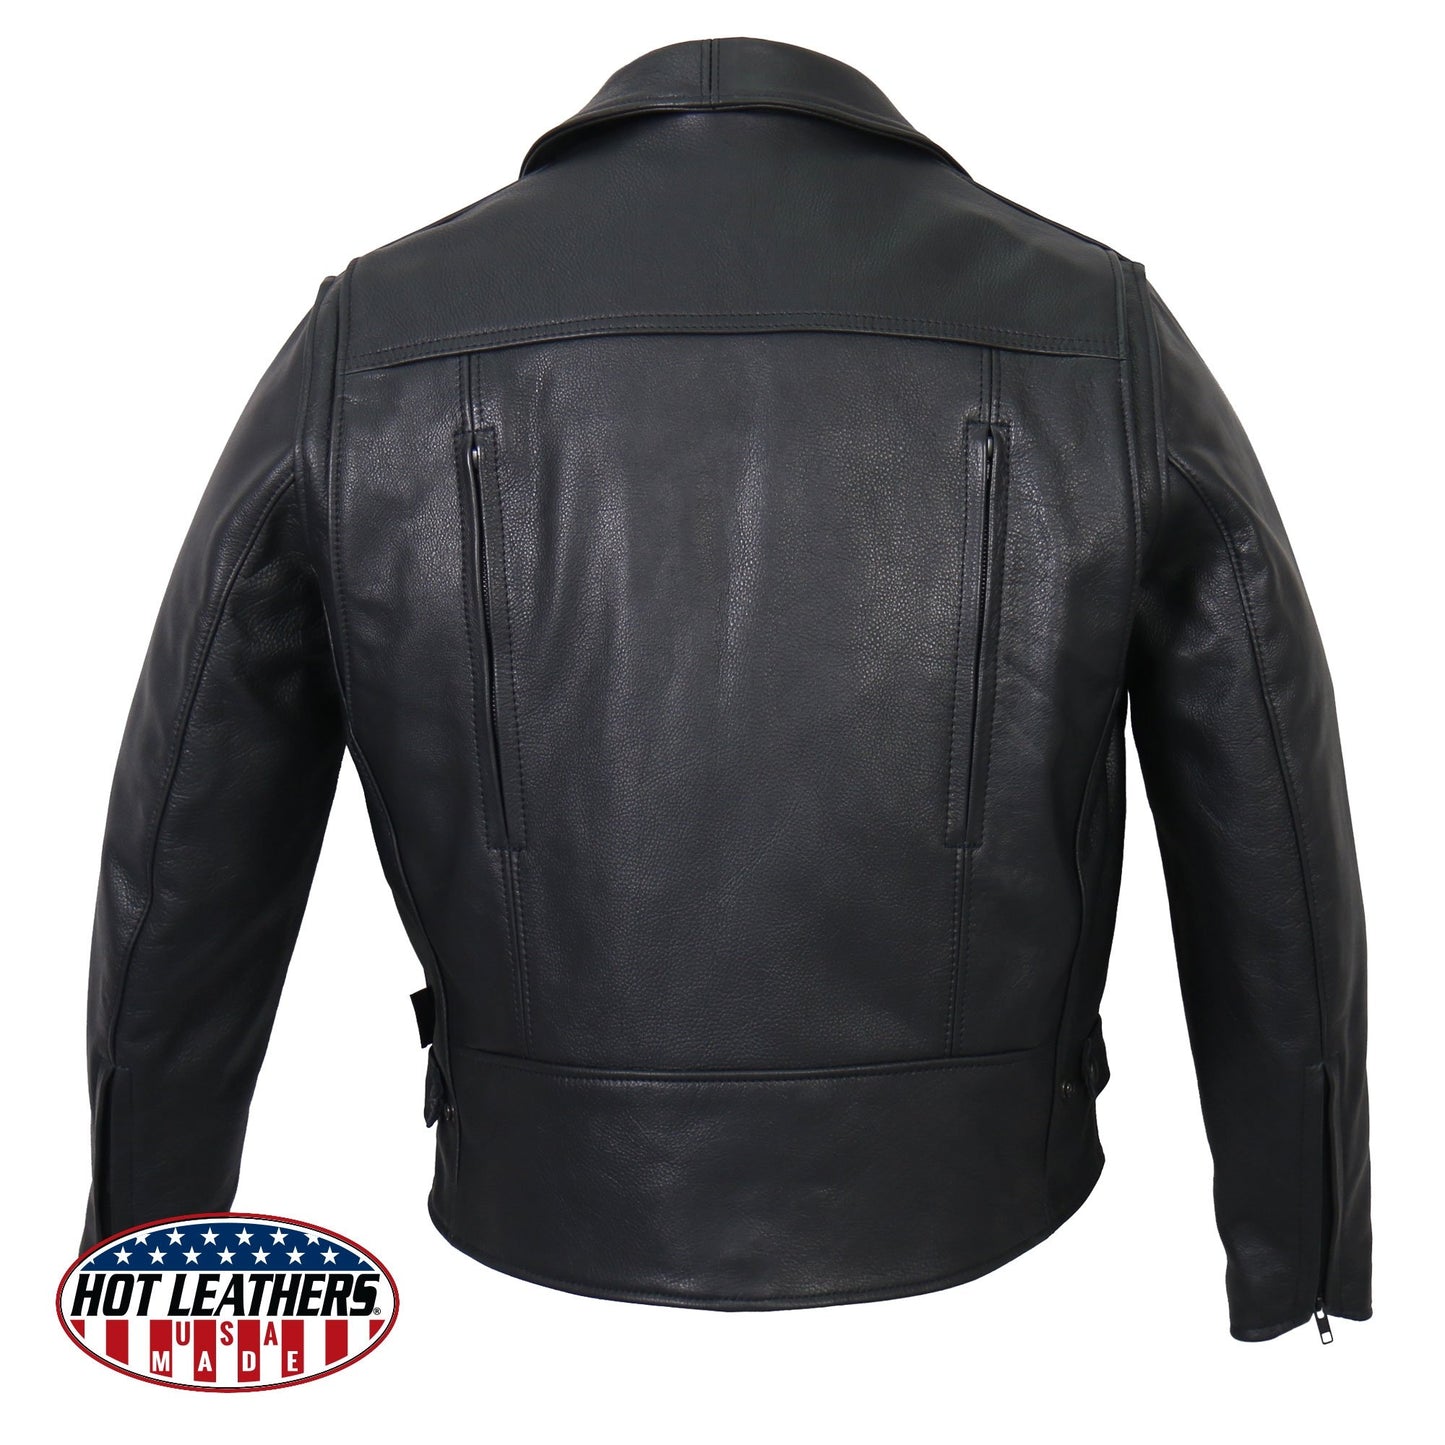 Hot Leathers JKM5008 Men's USA Made Black Premium Leather Vented Motorcycle Jacket